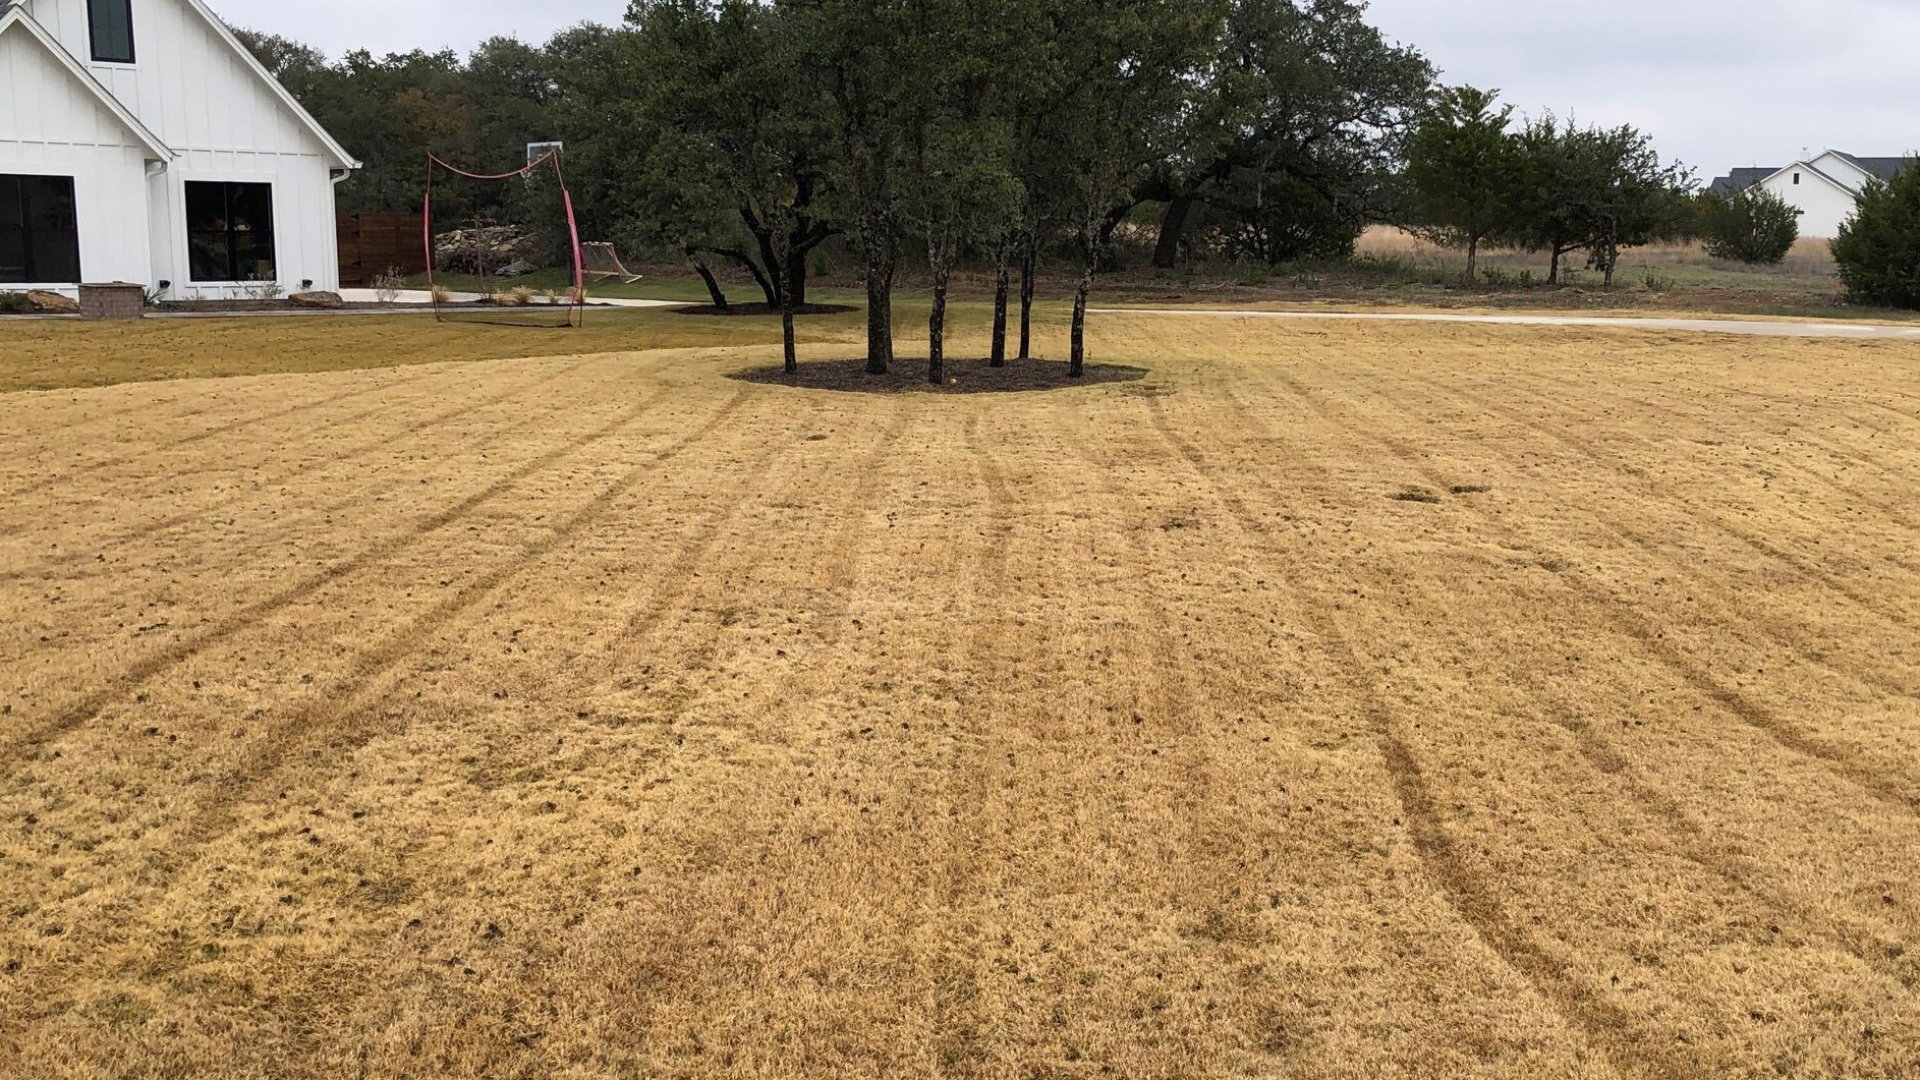 If Your Yard Has Zoysia Grass, Aerating Every Year Is a Must!